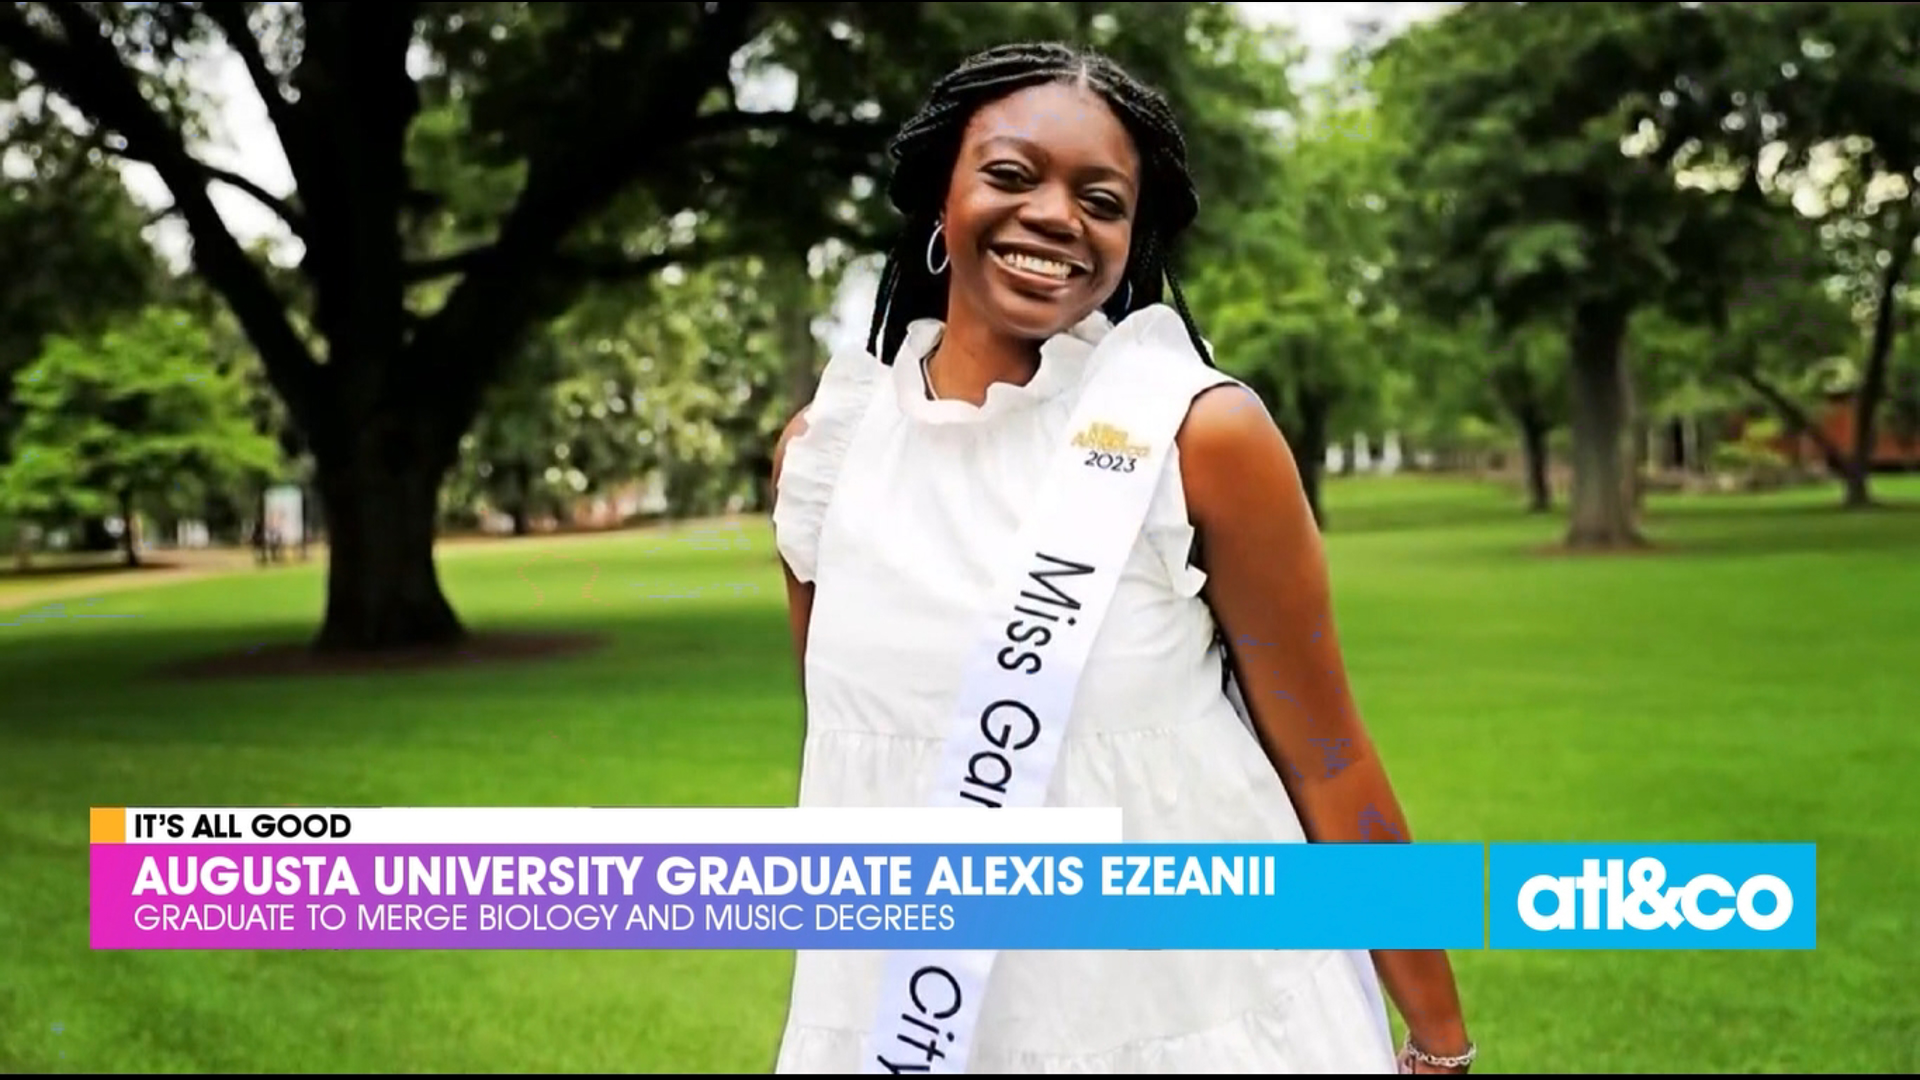 Augusta University graduate Alexis Ezeanii is Miss Garden City and a physician-scientist in training.